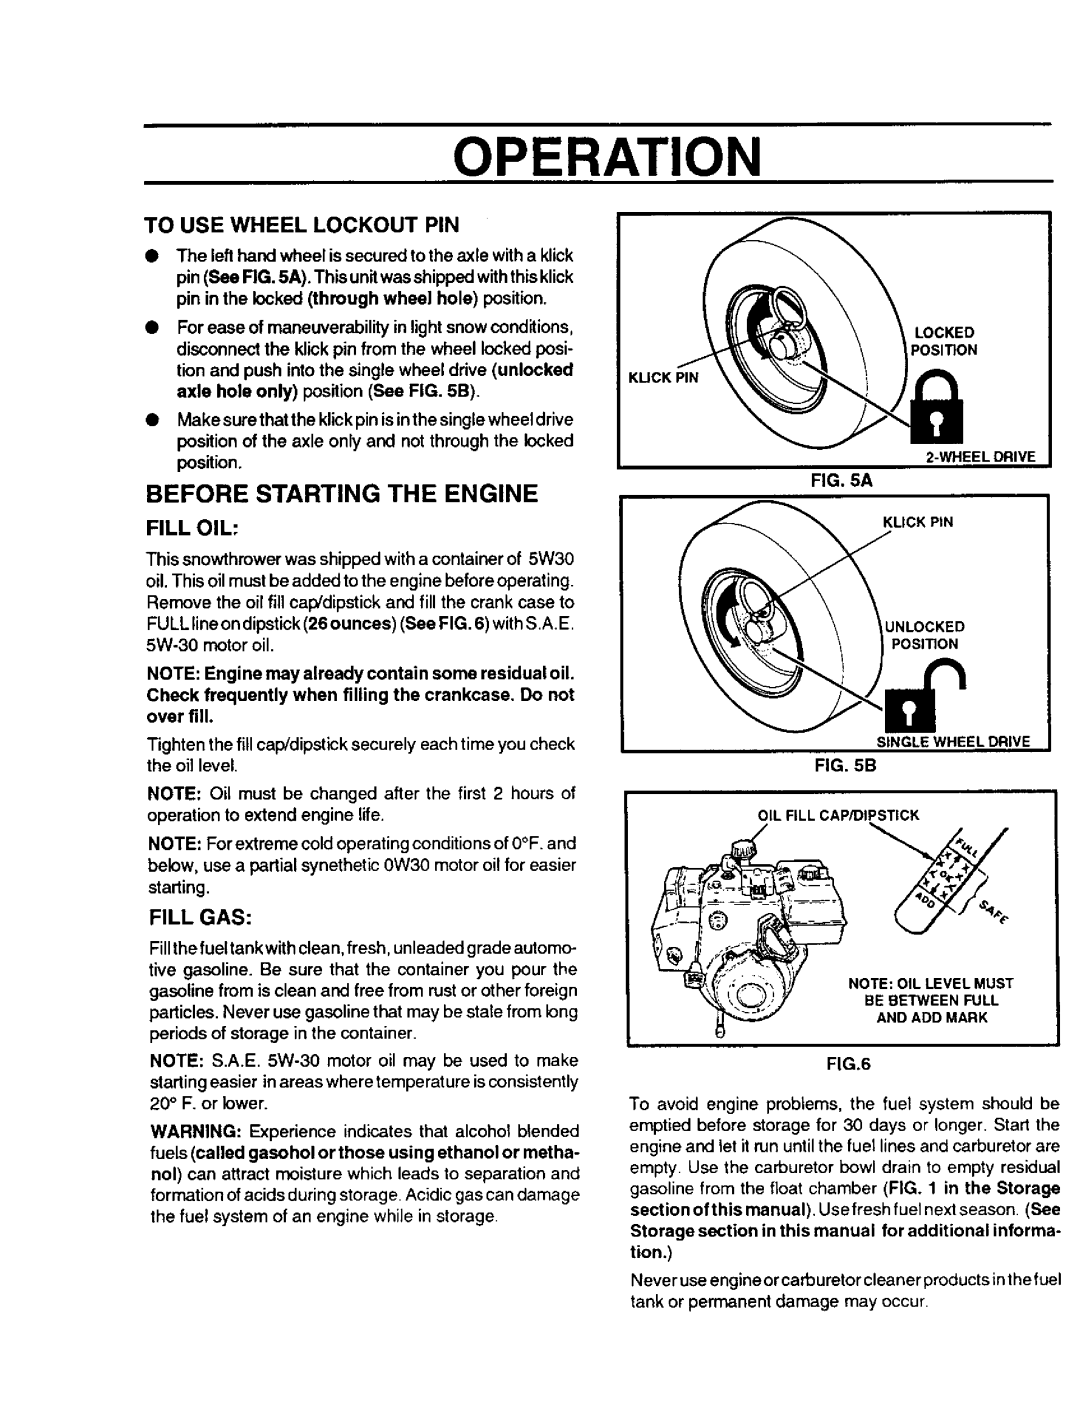 Sears 536.886331 owner manual Operation, Before Starting The Engine, To Use Wheel Lockout Pin, Fill Oil, Fill Gas 